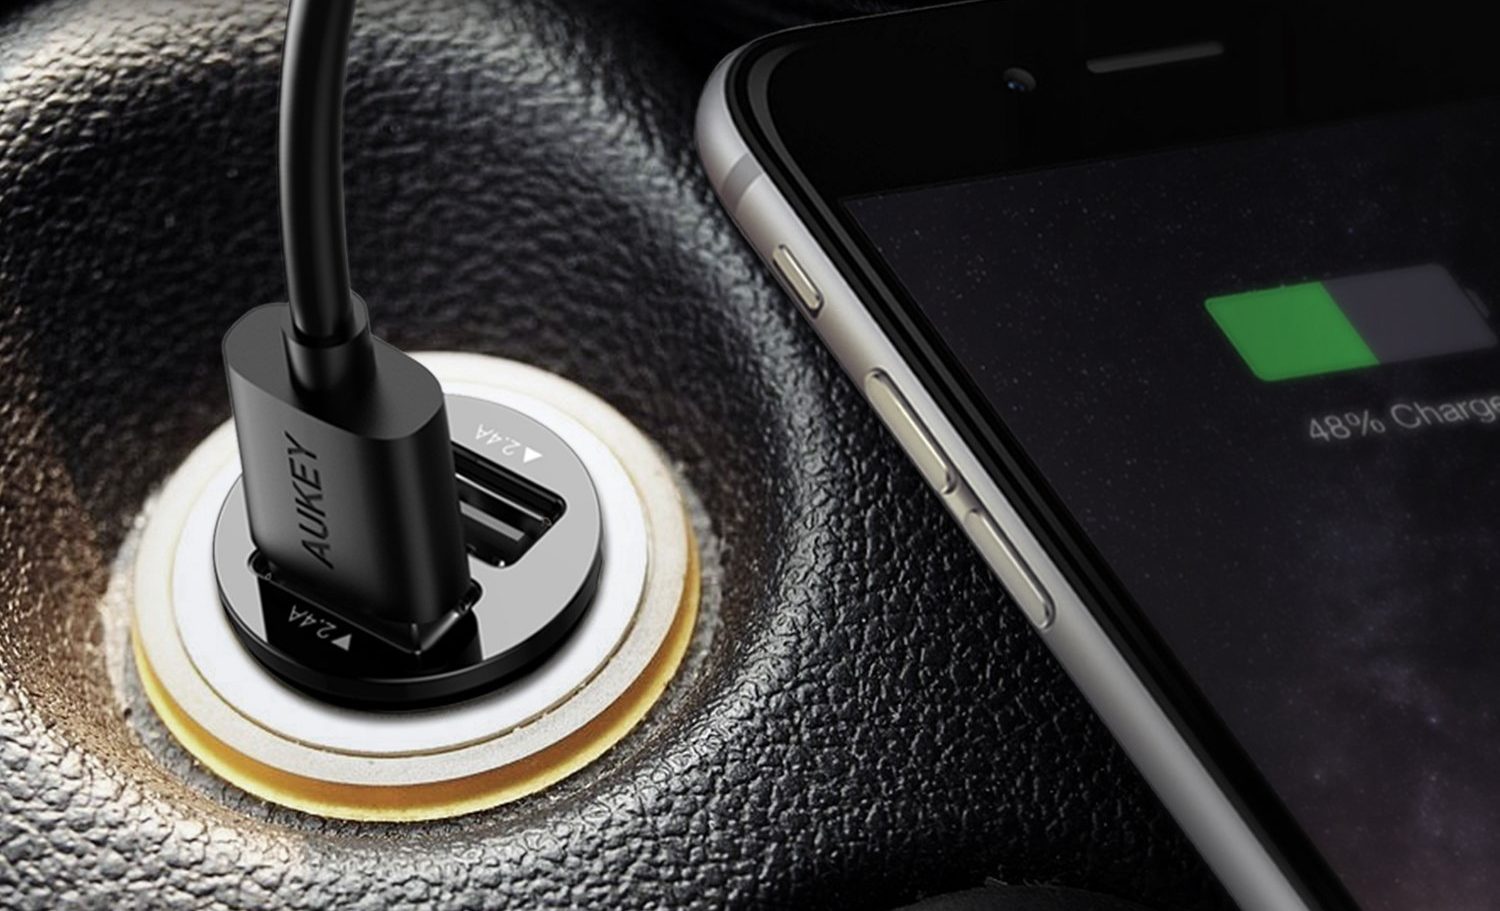 Aukey car charger connected to an iPhone